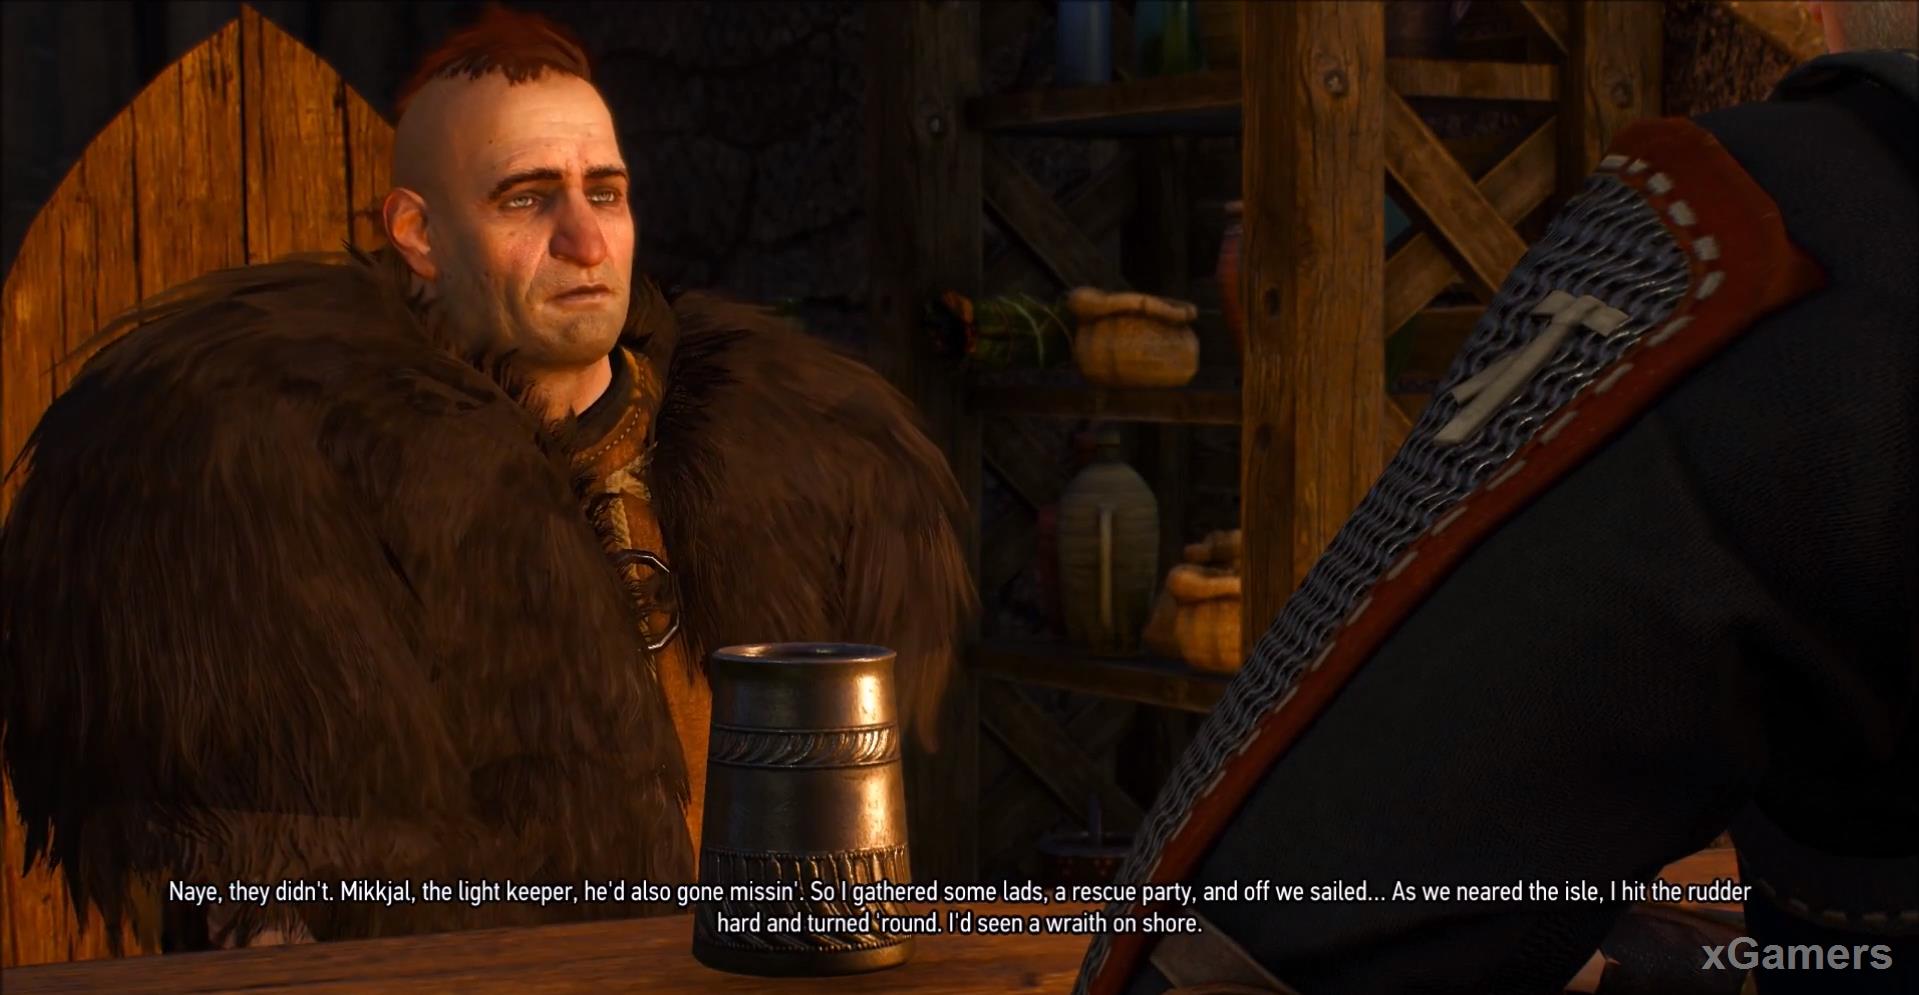 Jorund tells Geralt that a Ghost has appeared at the Eldberg lighthouse after the lighthouse suddenly went out